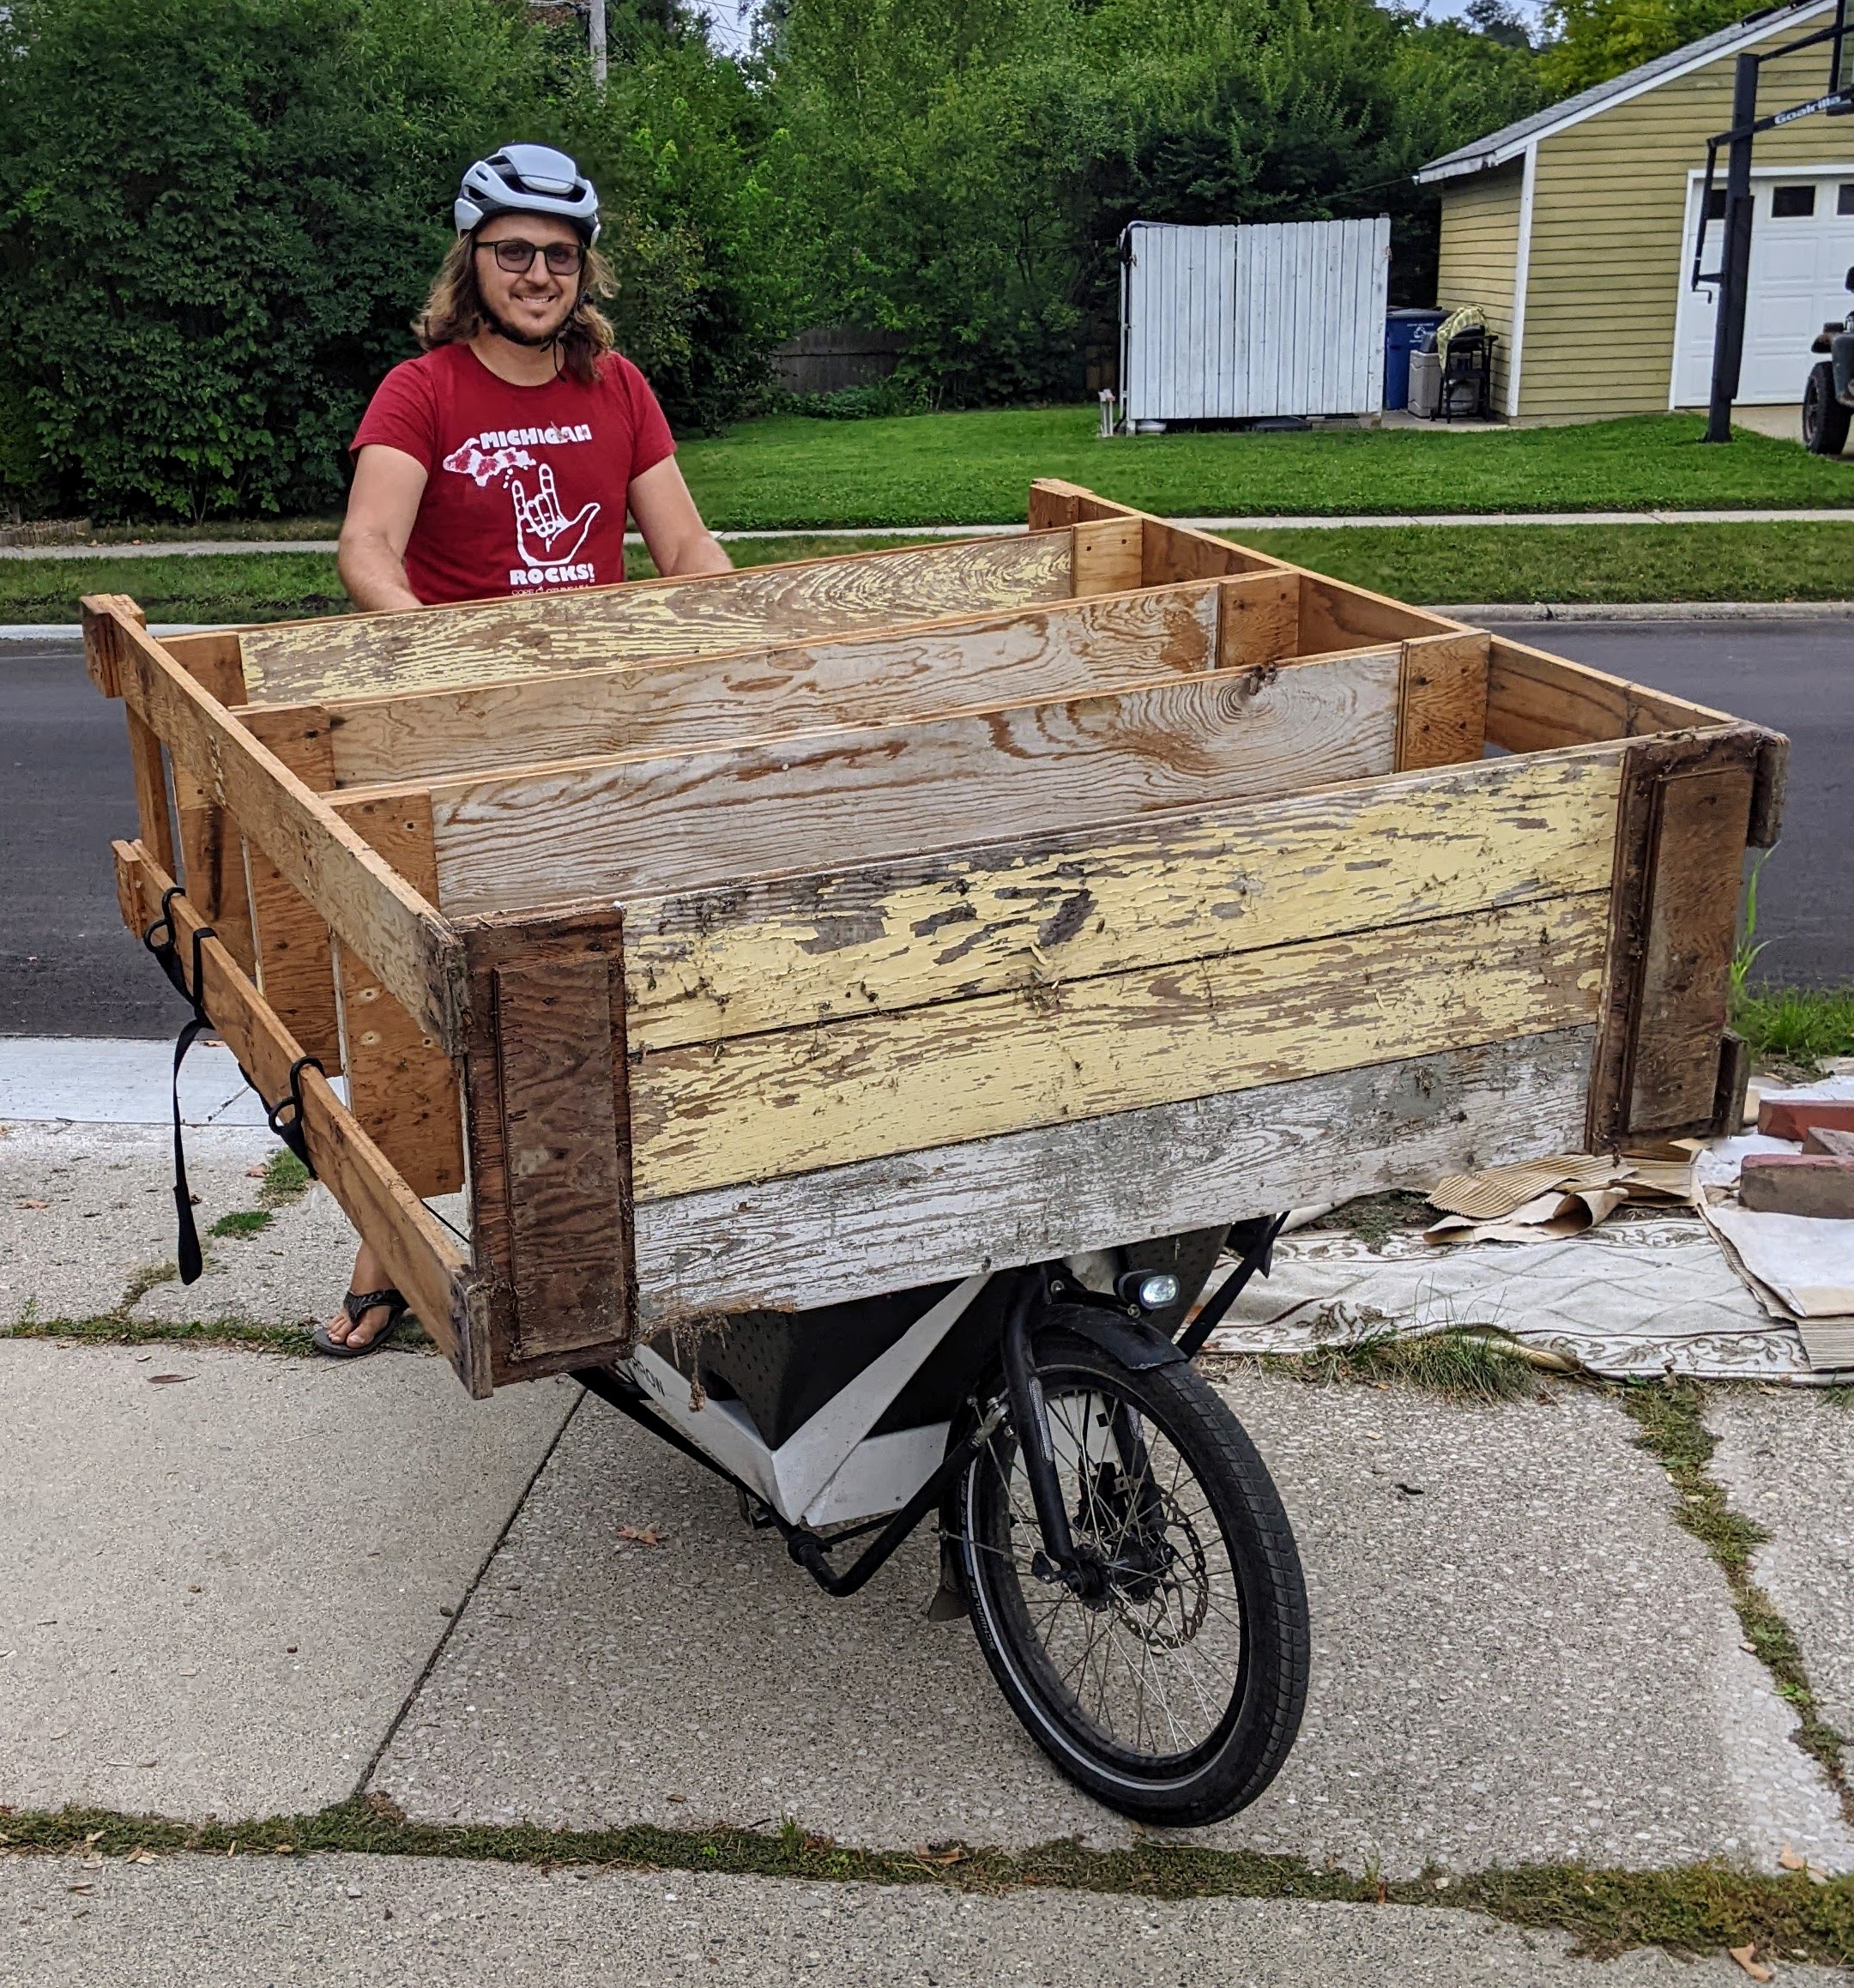 Joe on a cargo bike with a box in front. Strapped on top of the bike is a shelving unit.